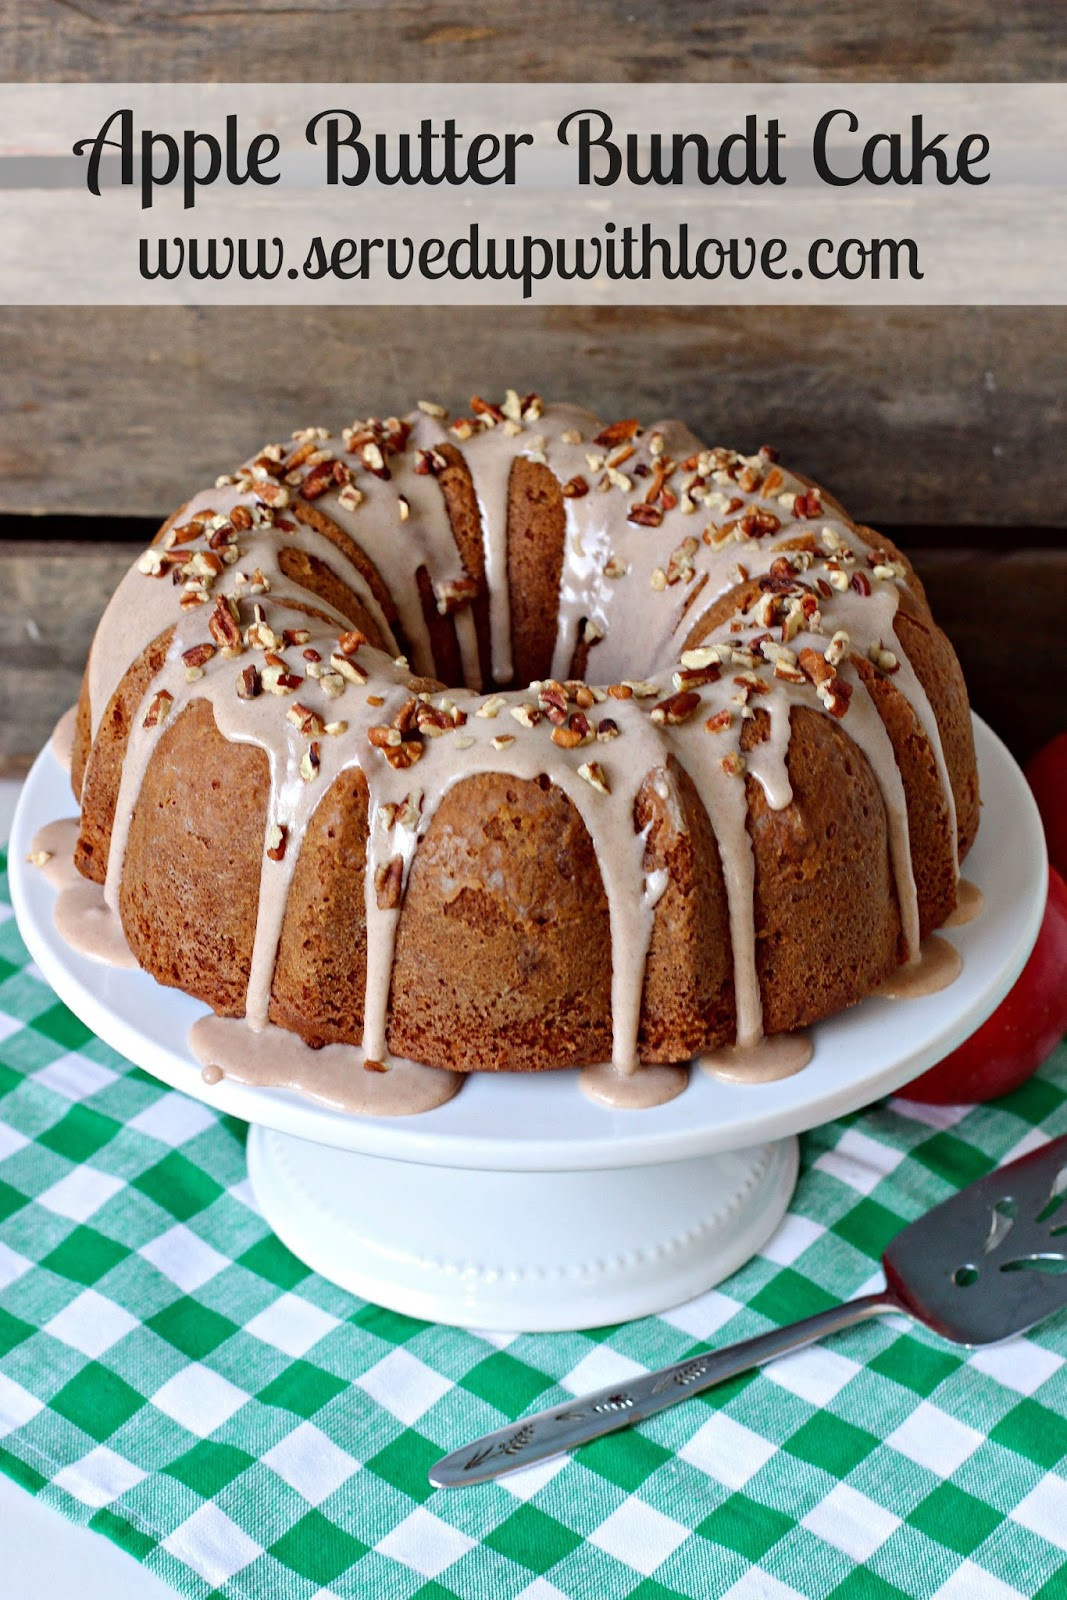 Apple butter Cake New Served Up with Love Apple butter Bundt Cake